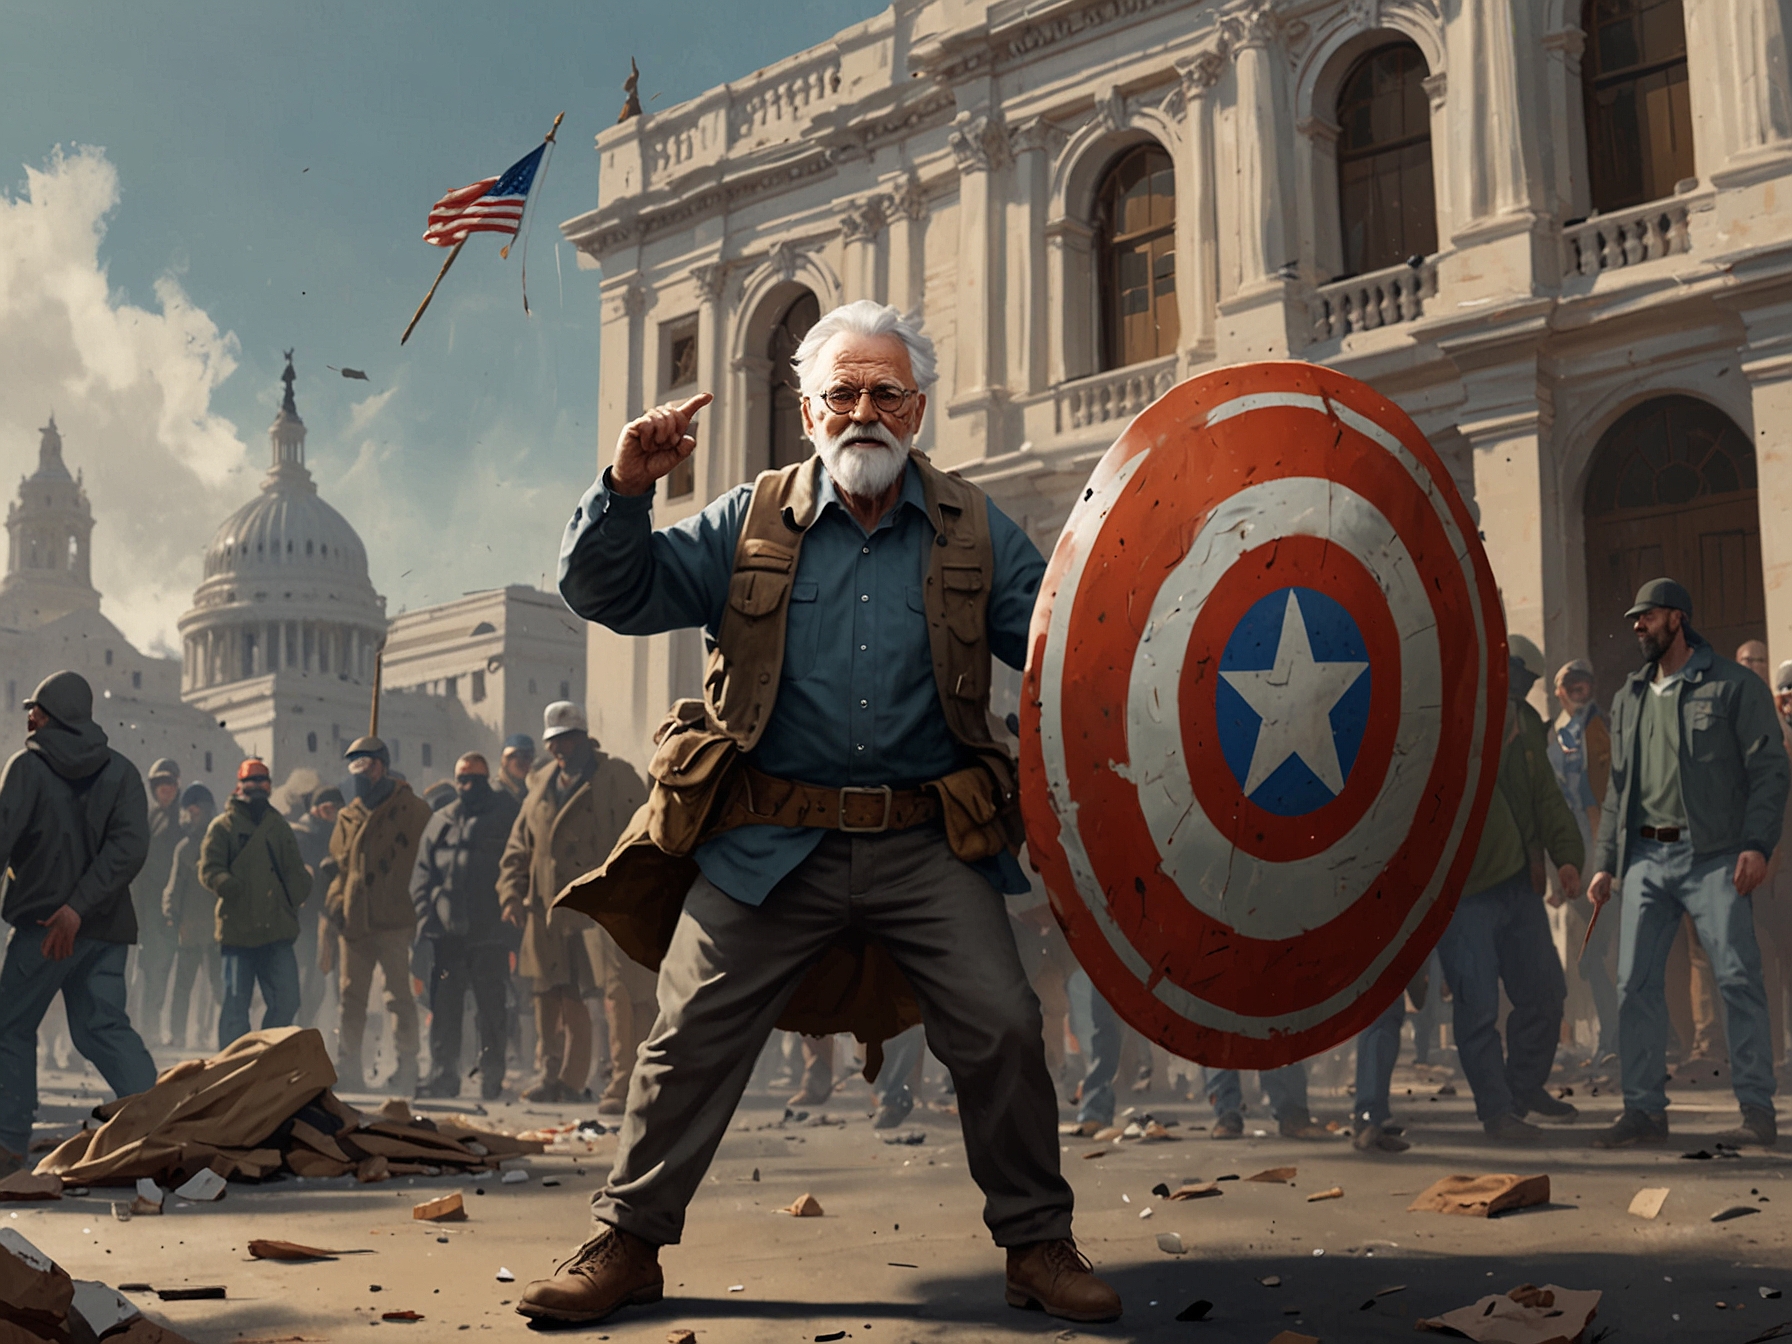 Illustration of 'Shield Grampy' wielding a shield during the January 6 Capitol riot, based on viral social media footage that highlighted his pivotal role in the insurrection.